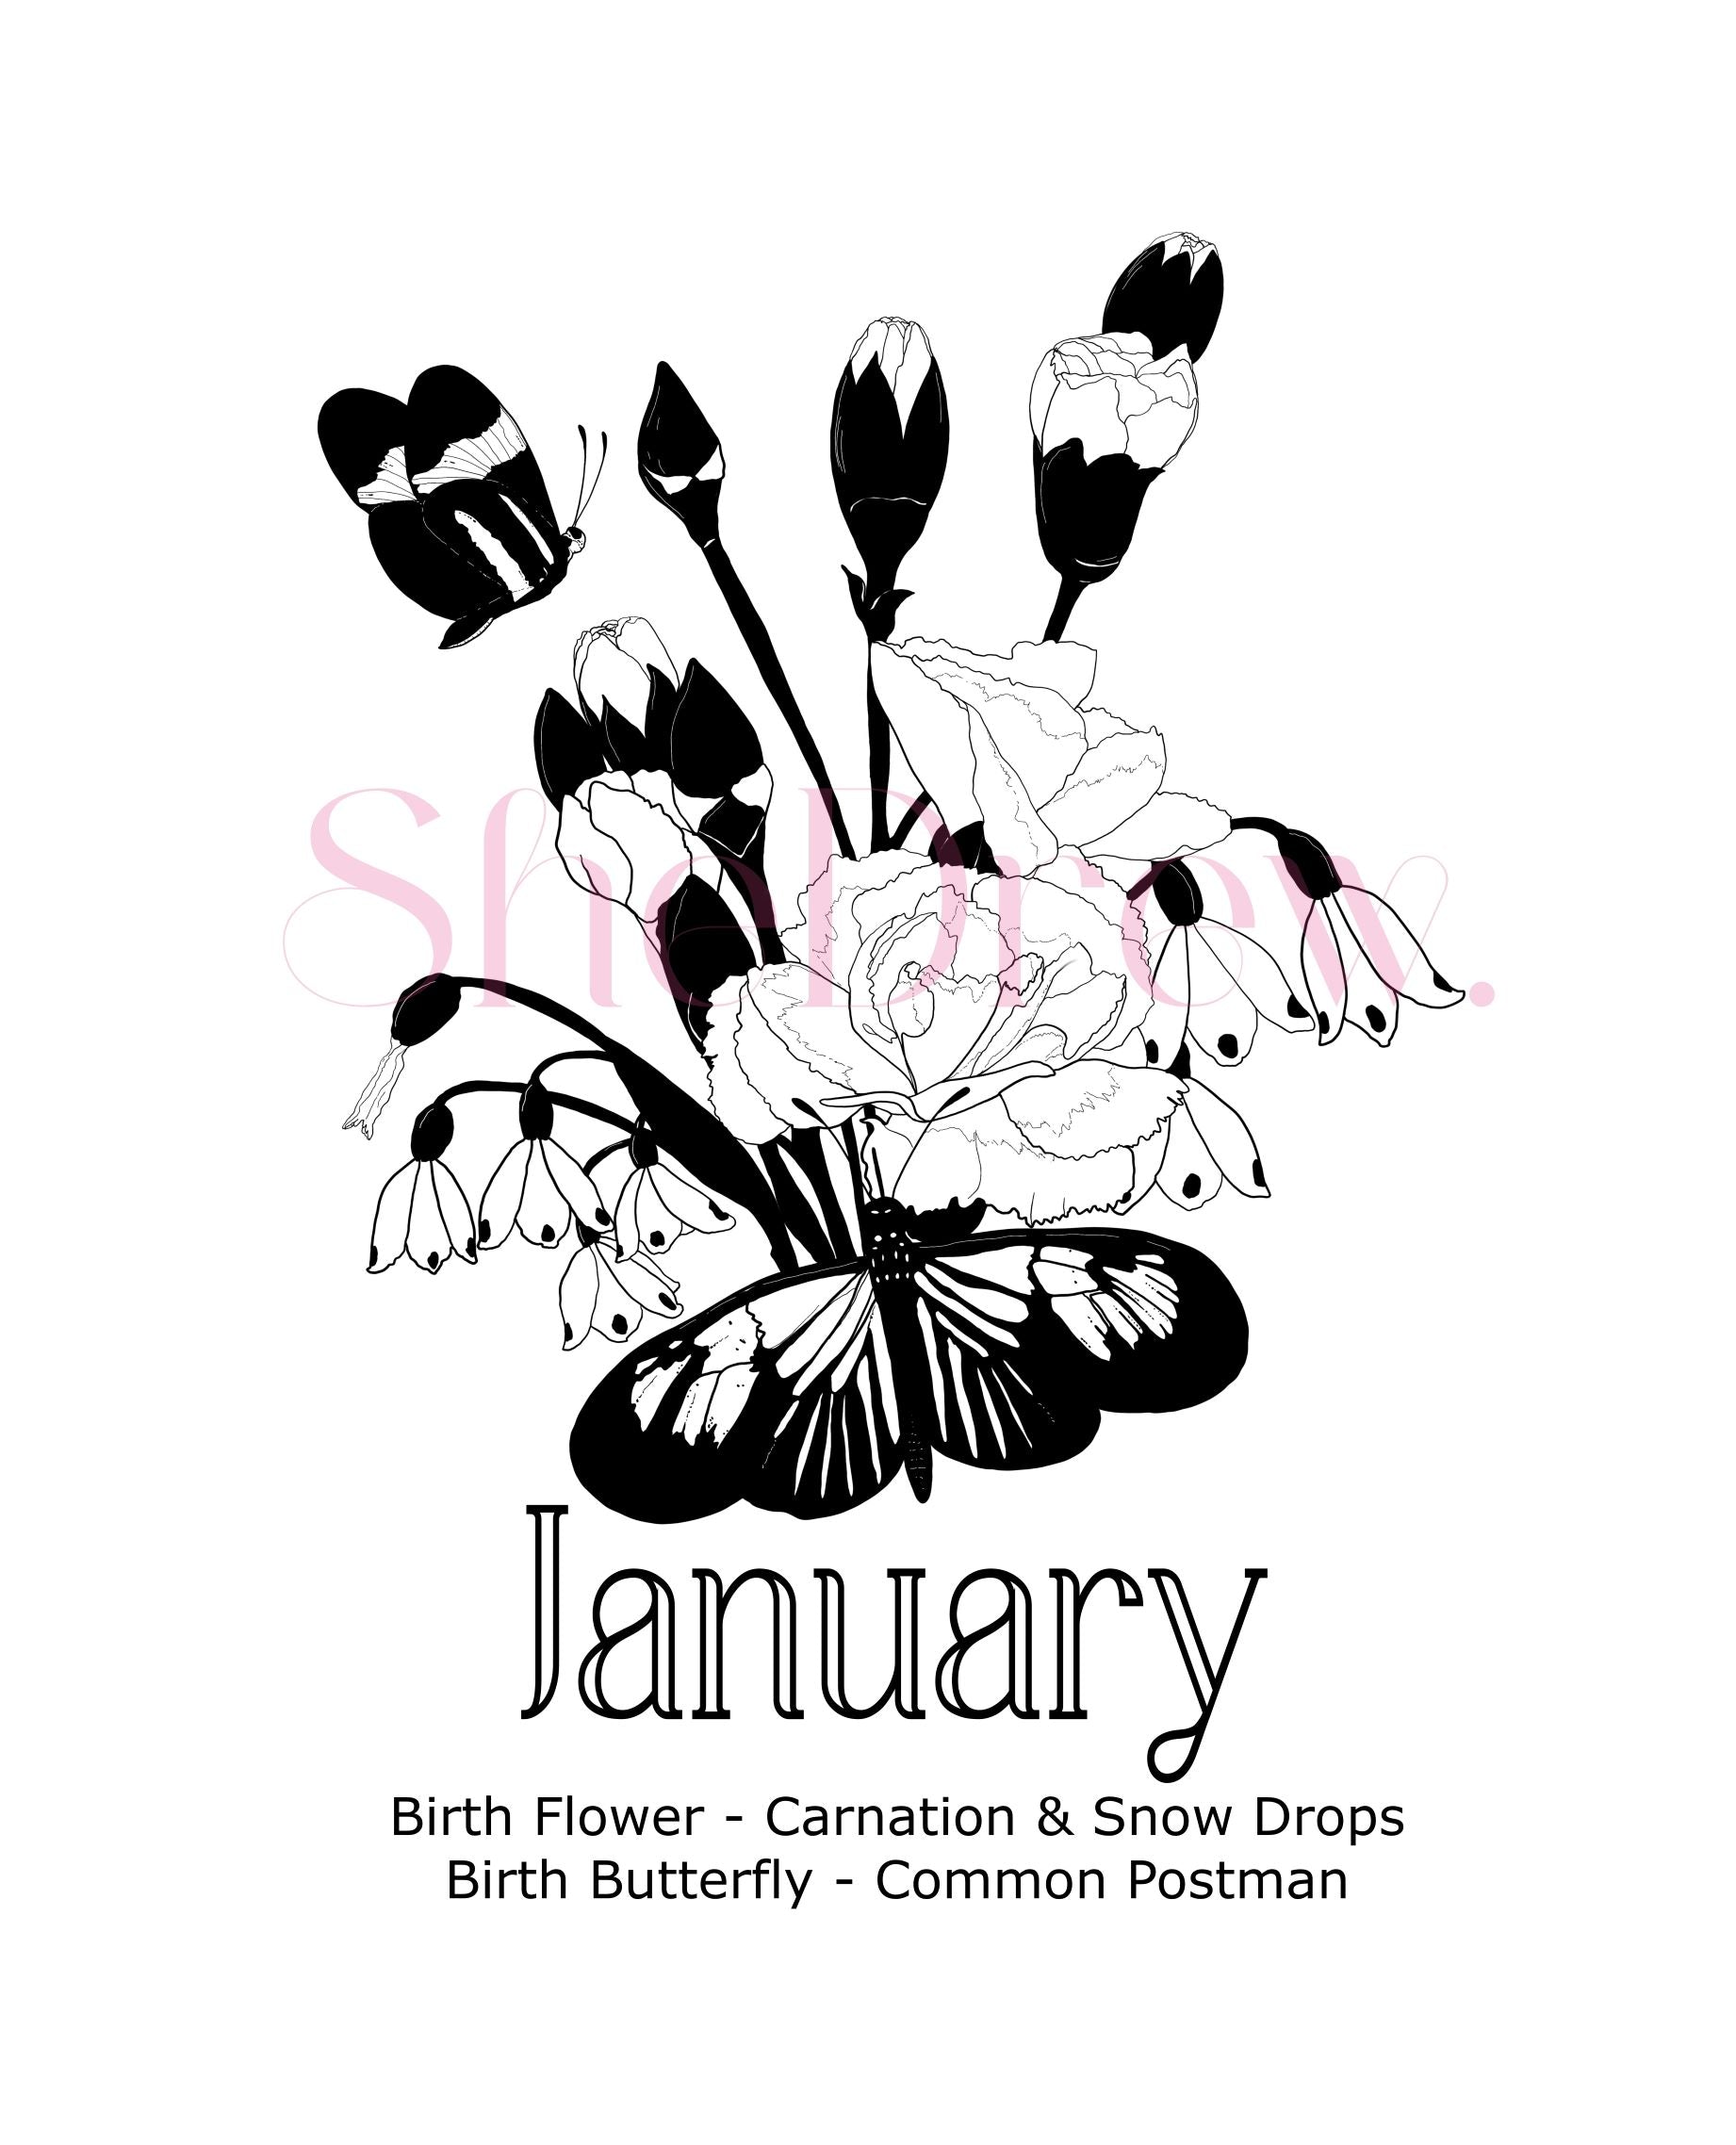 January Birth Month Flowers & Butterfly